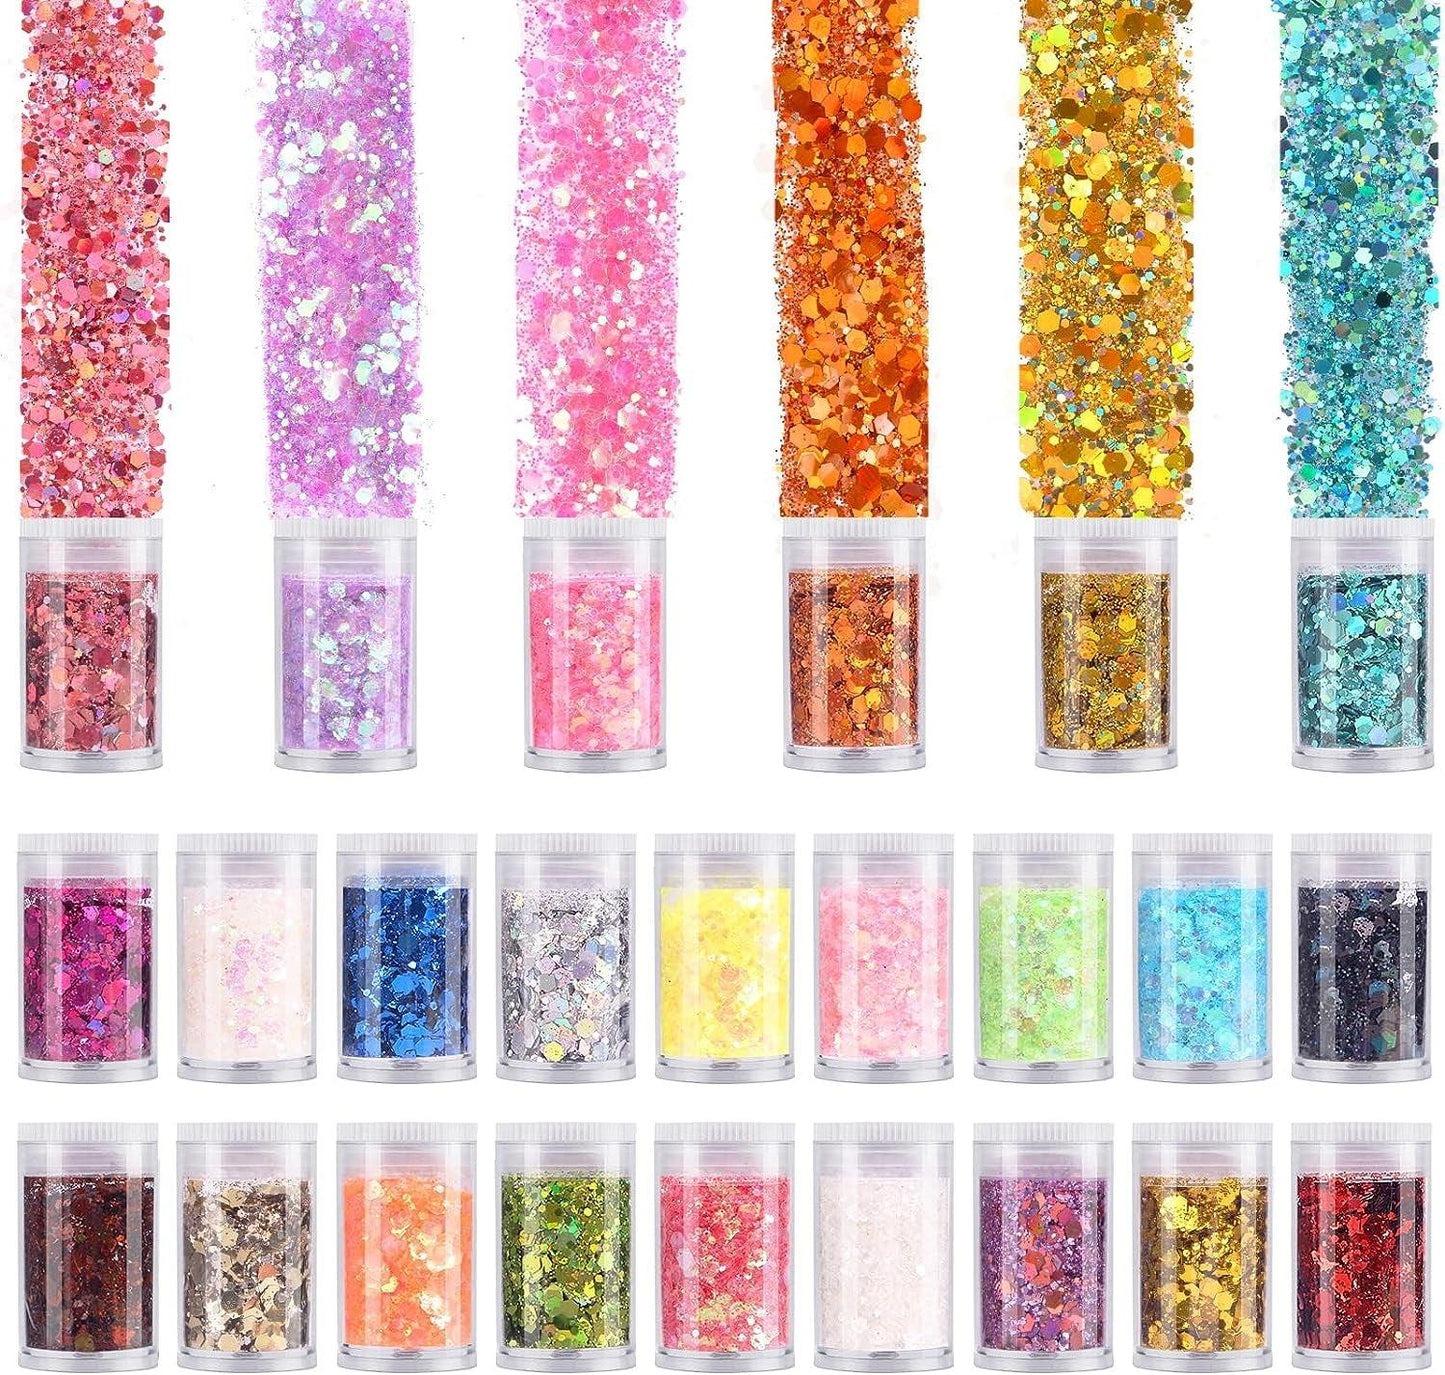 Pack of 24 Colors Chunky and Fine Glitter Mixed,,Nail Art Face Body Hair Iridescent Sequins Loose Glitter,Diy Epoxy Resin Craft Slime Tumbler Making Flakes Glitter Powder - WoodArtSupply